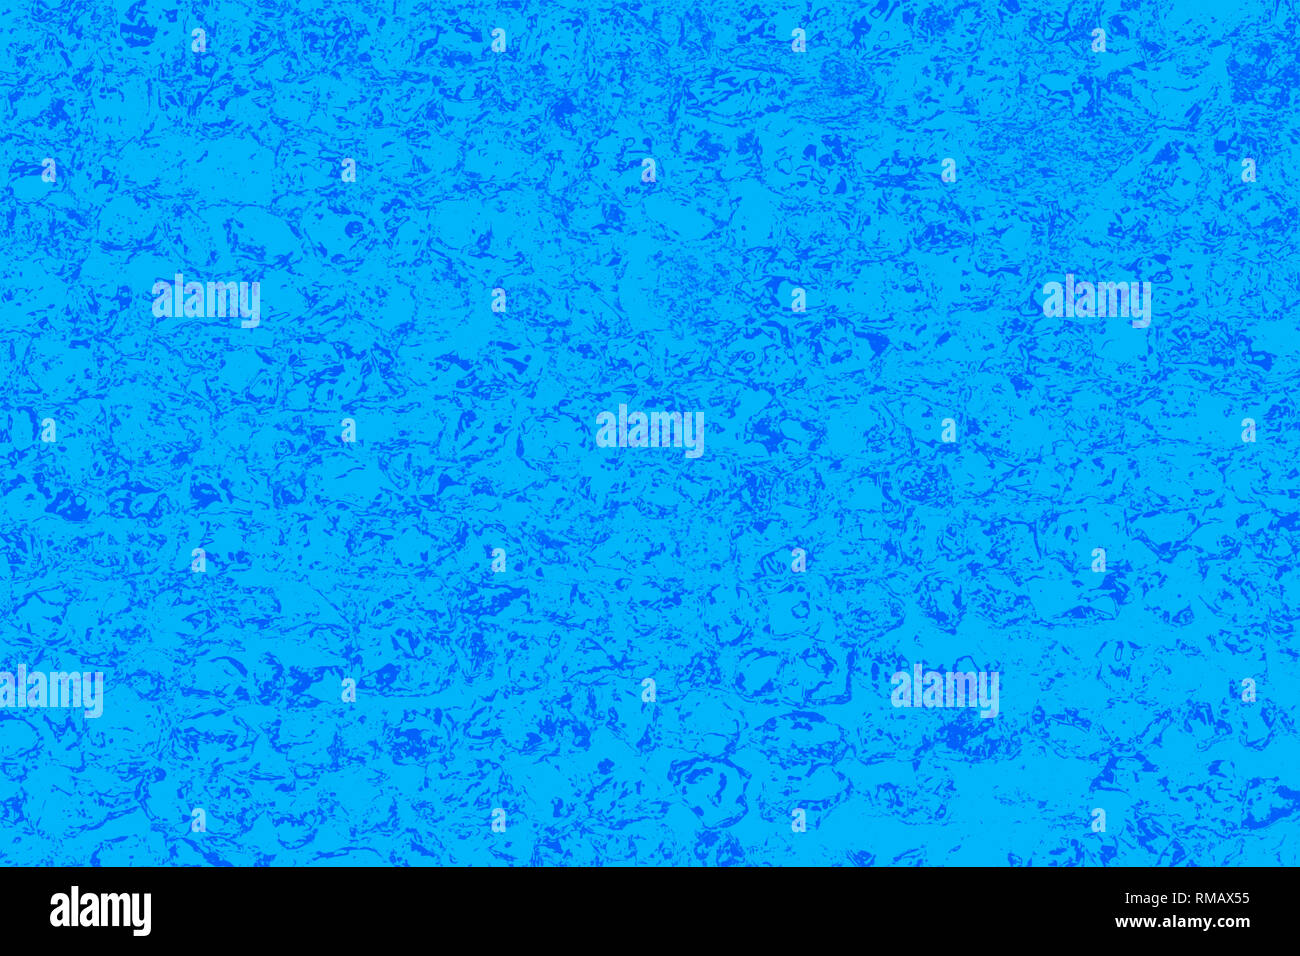 Blue abstract background pattern of truly random and detailed patterns. Stock Photo